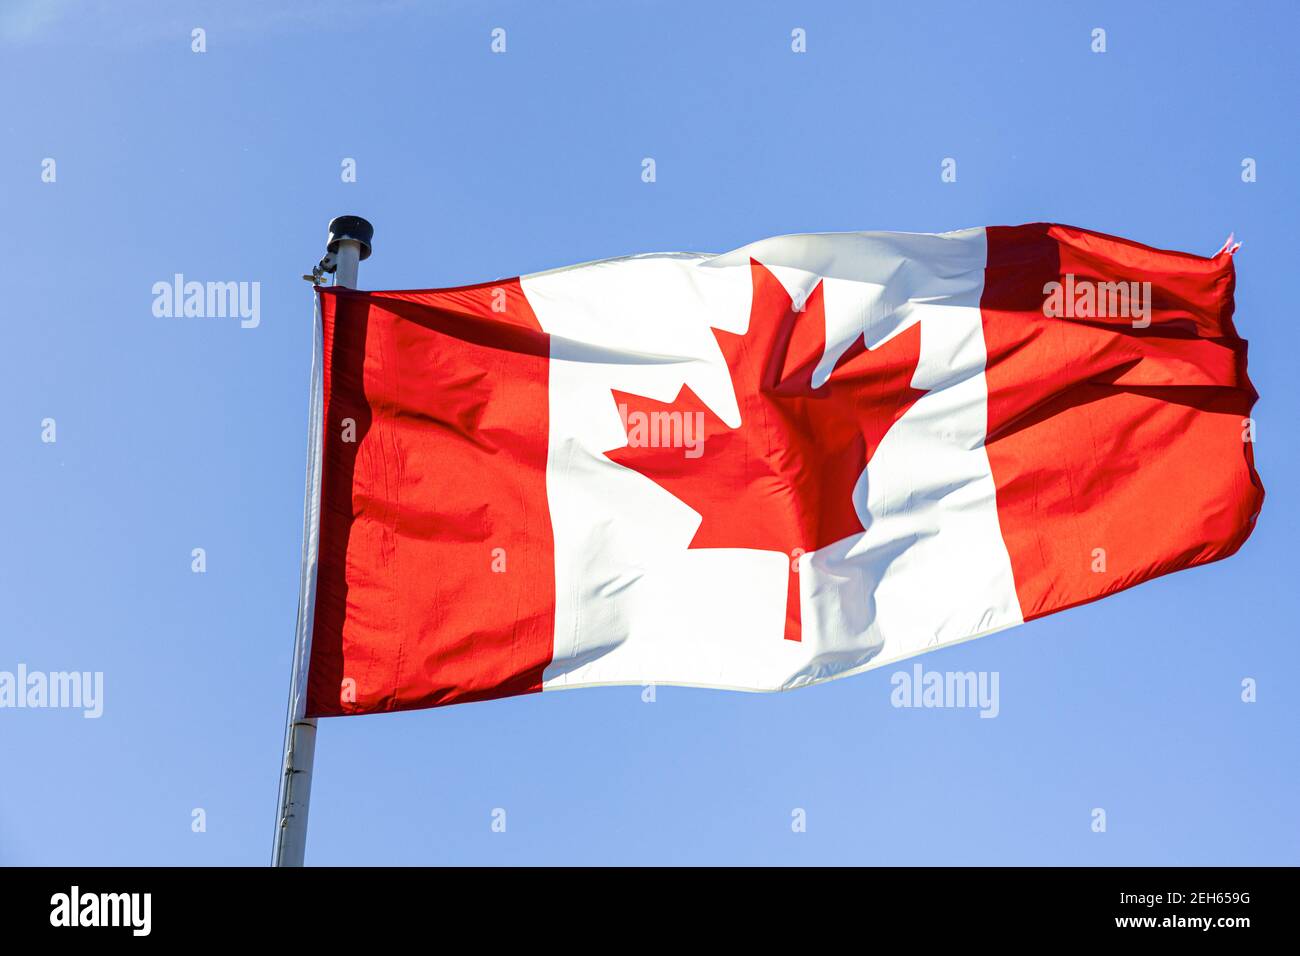 The Canadian national flag fllying against a clear blue sky. Stock Photo